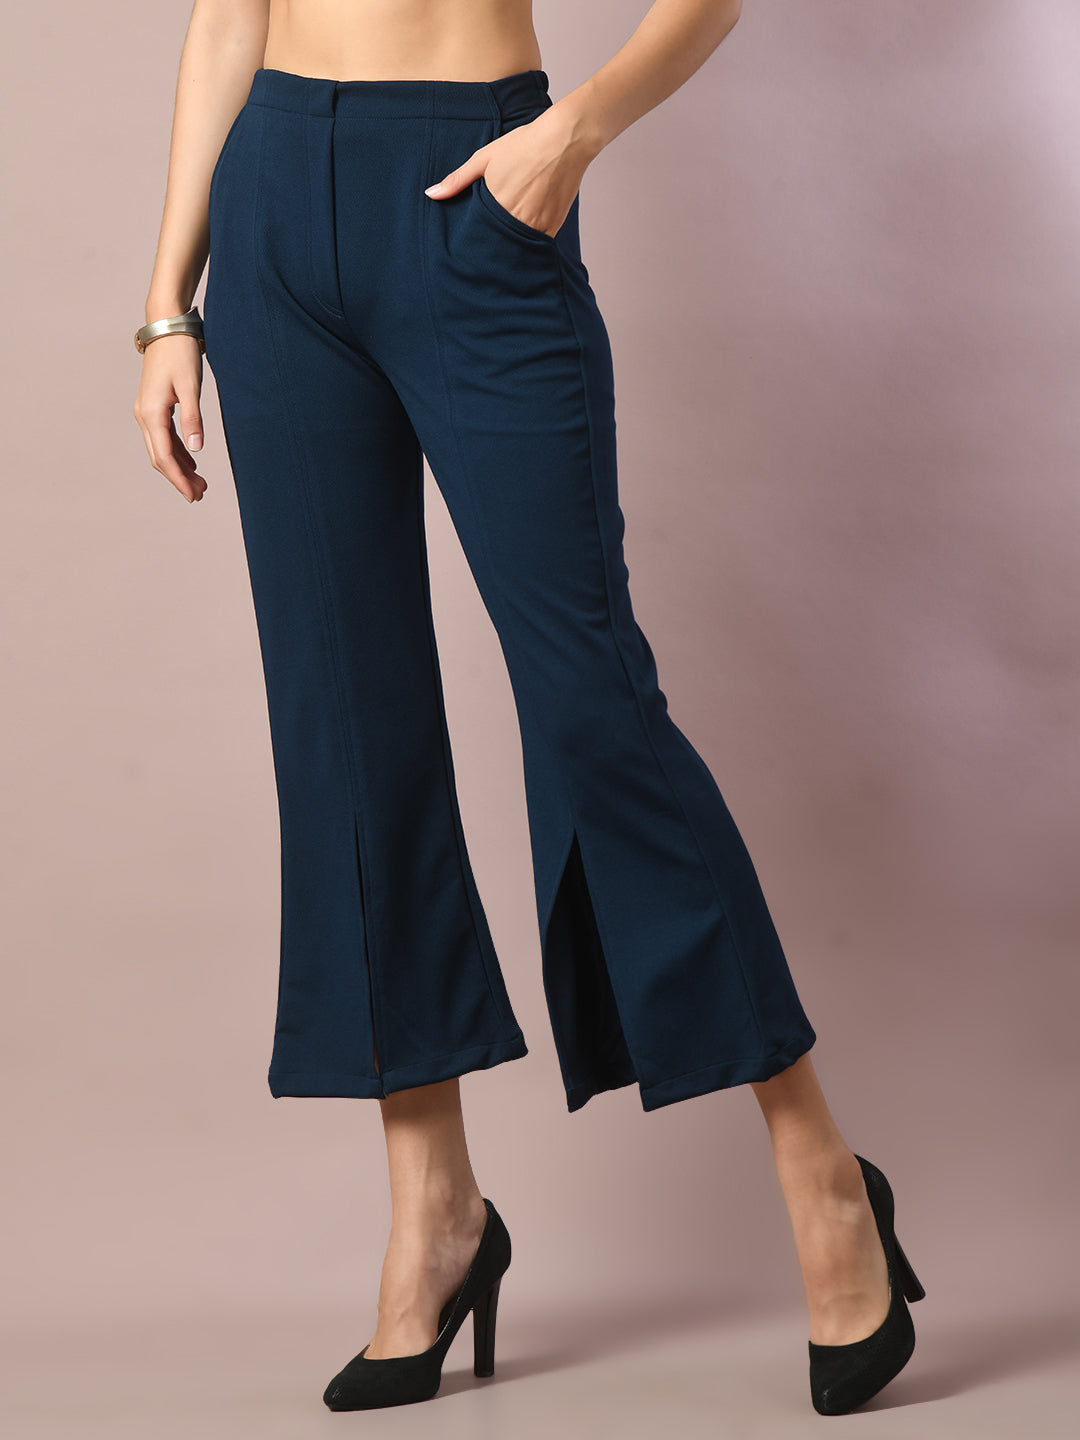 Women's  Blue Solid Party Parallel Trousers   - Myshka